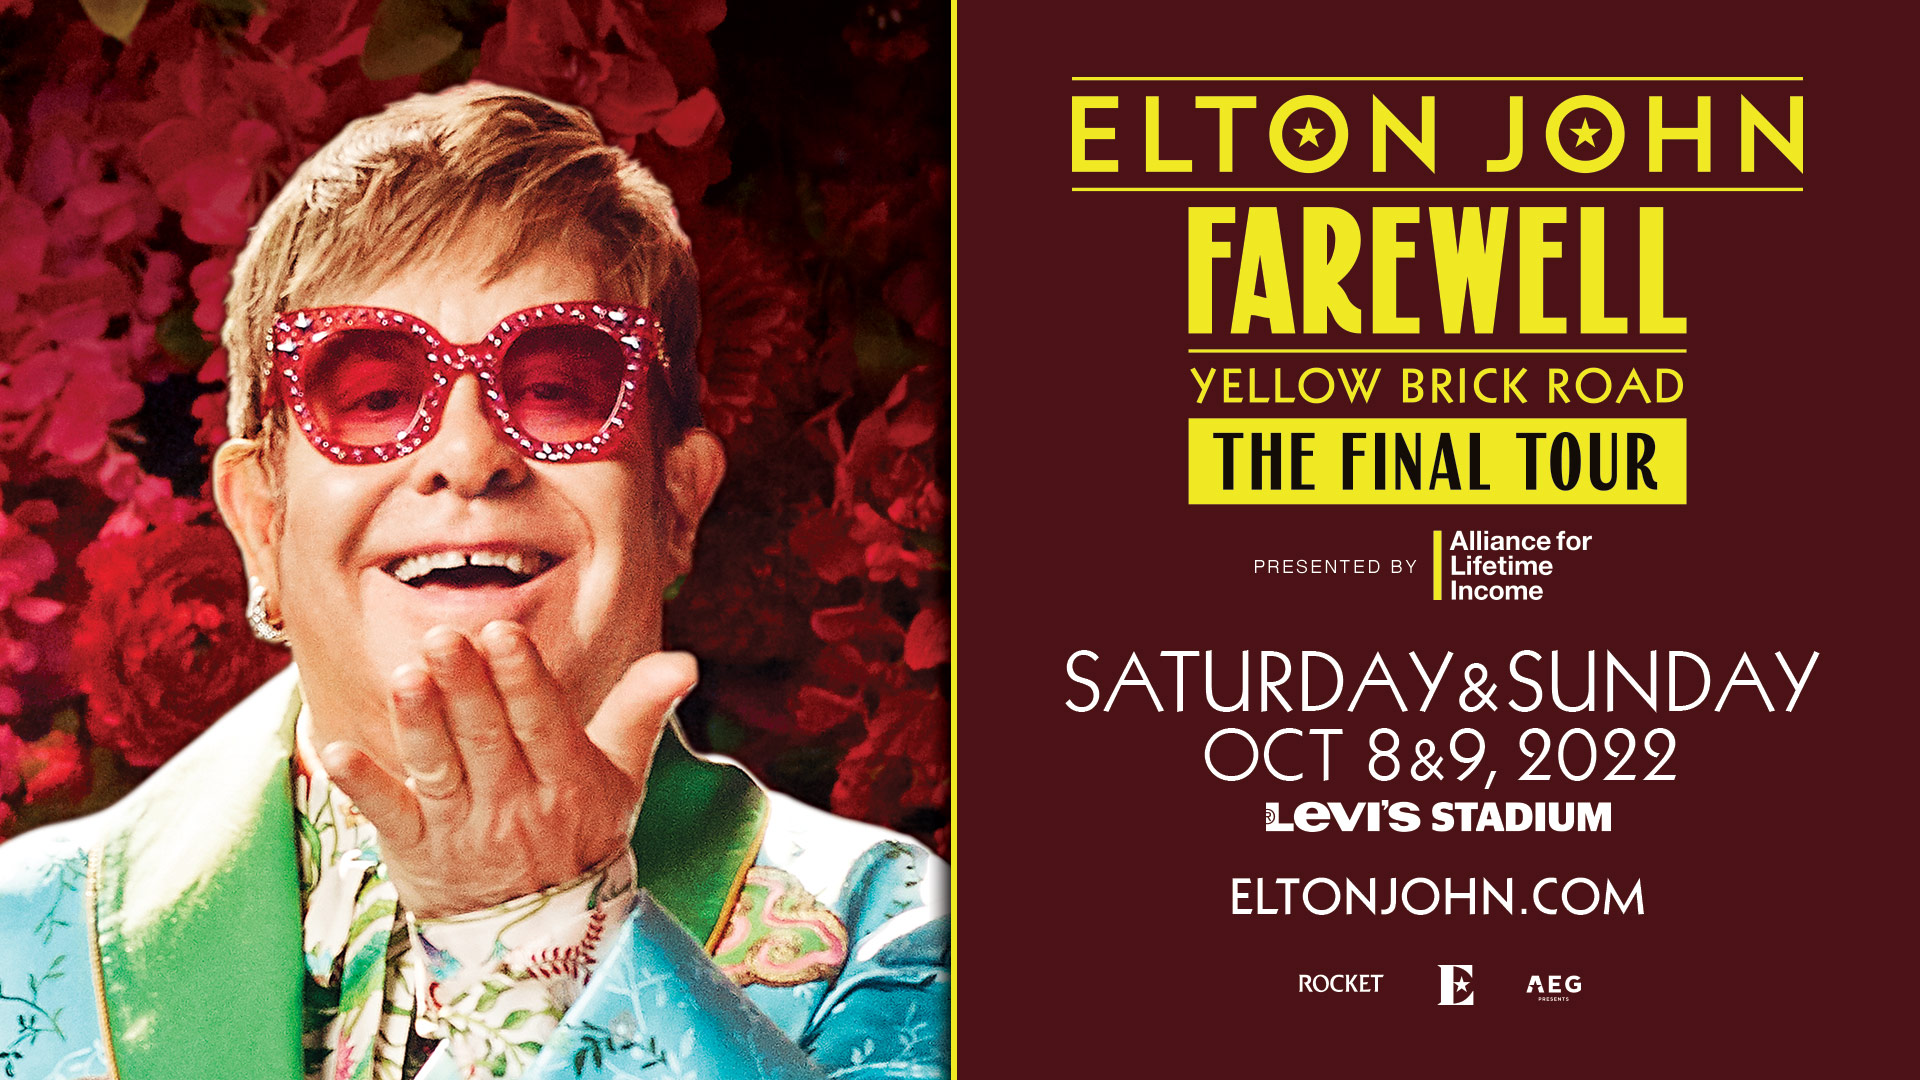 Elton John Concert | Live Stream, Date, Location and Tickets info